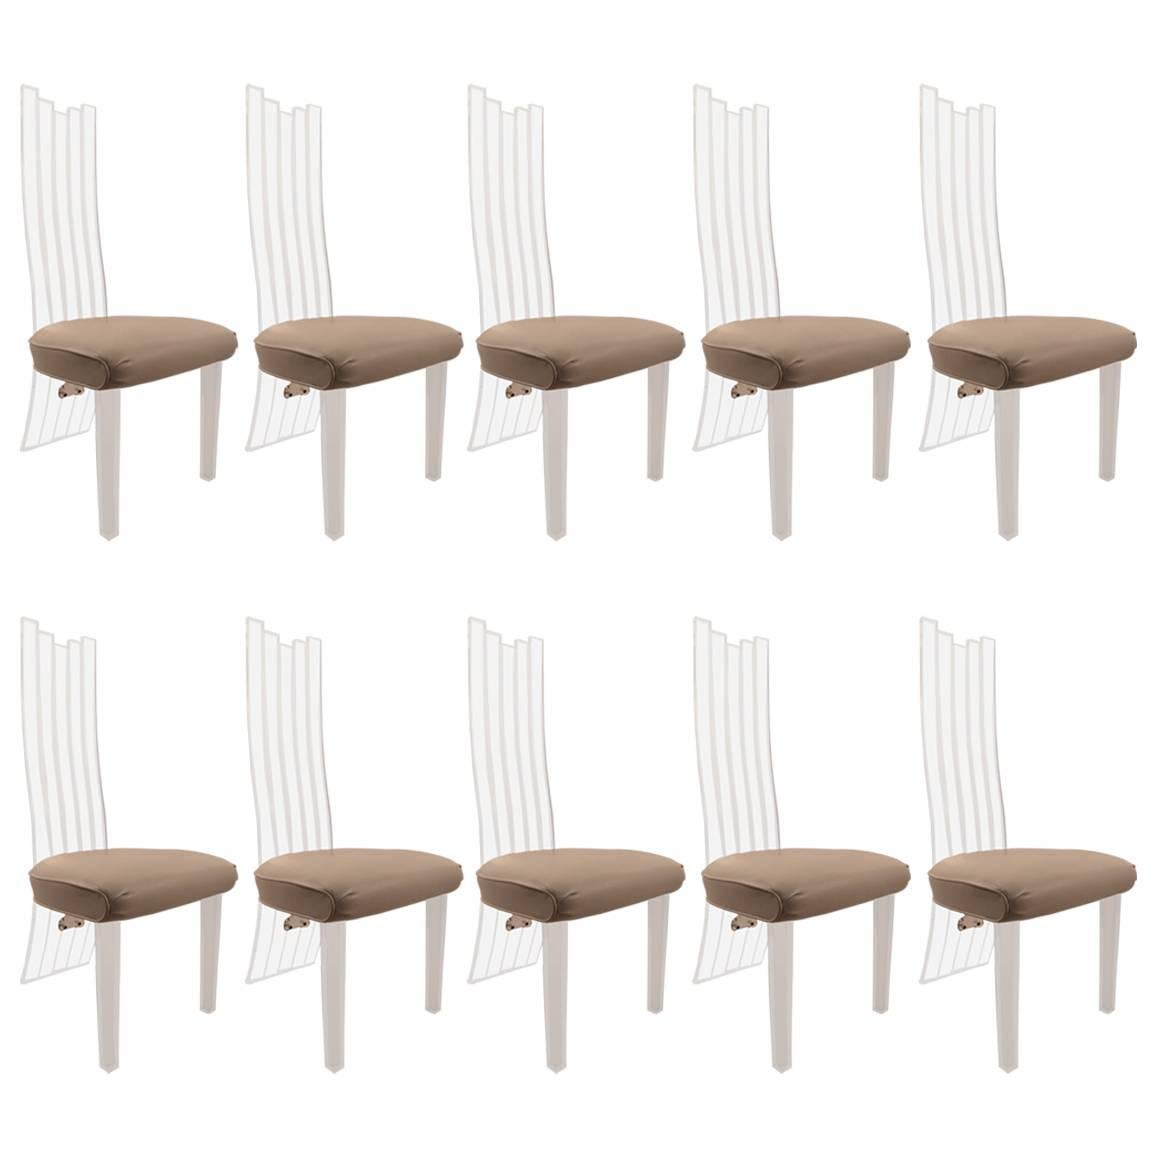 Set of Ten High Back Lucite Dining Chairs